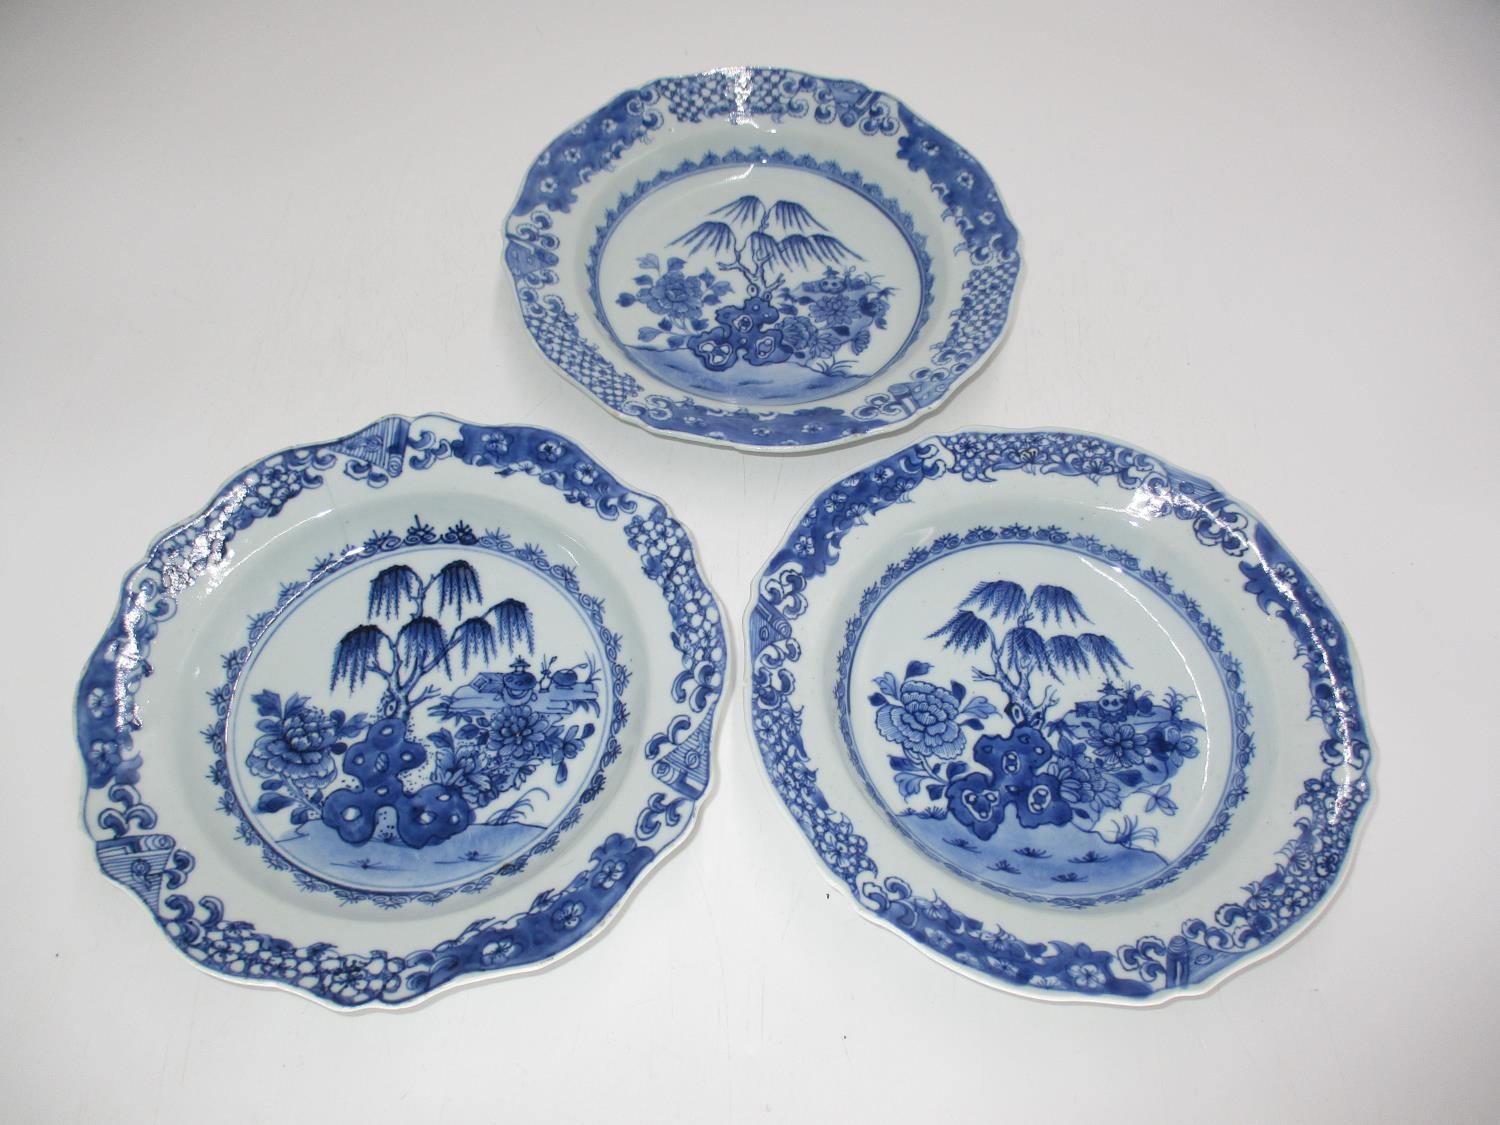 Three Late 18th/Early 19th Century Chinese Export Porcelain Blue and White Dishes, 23cm